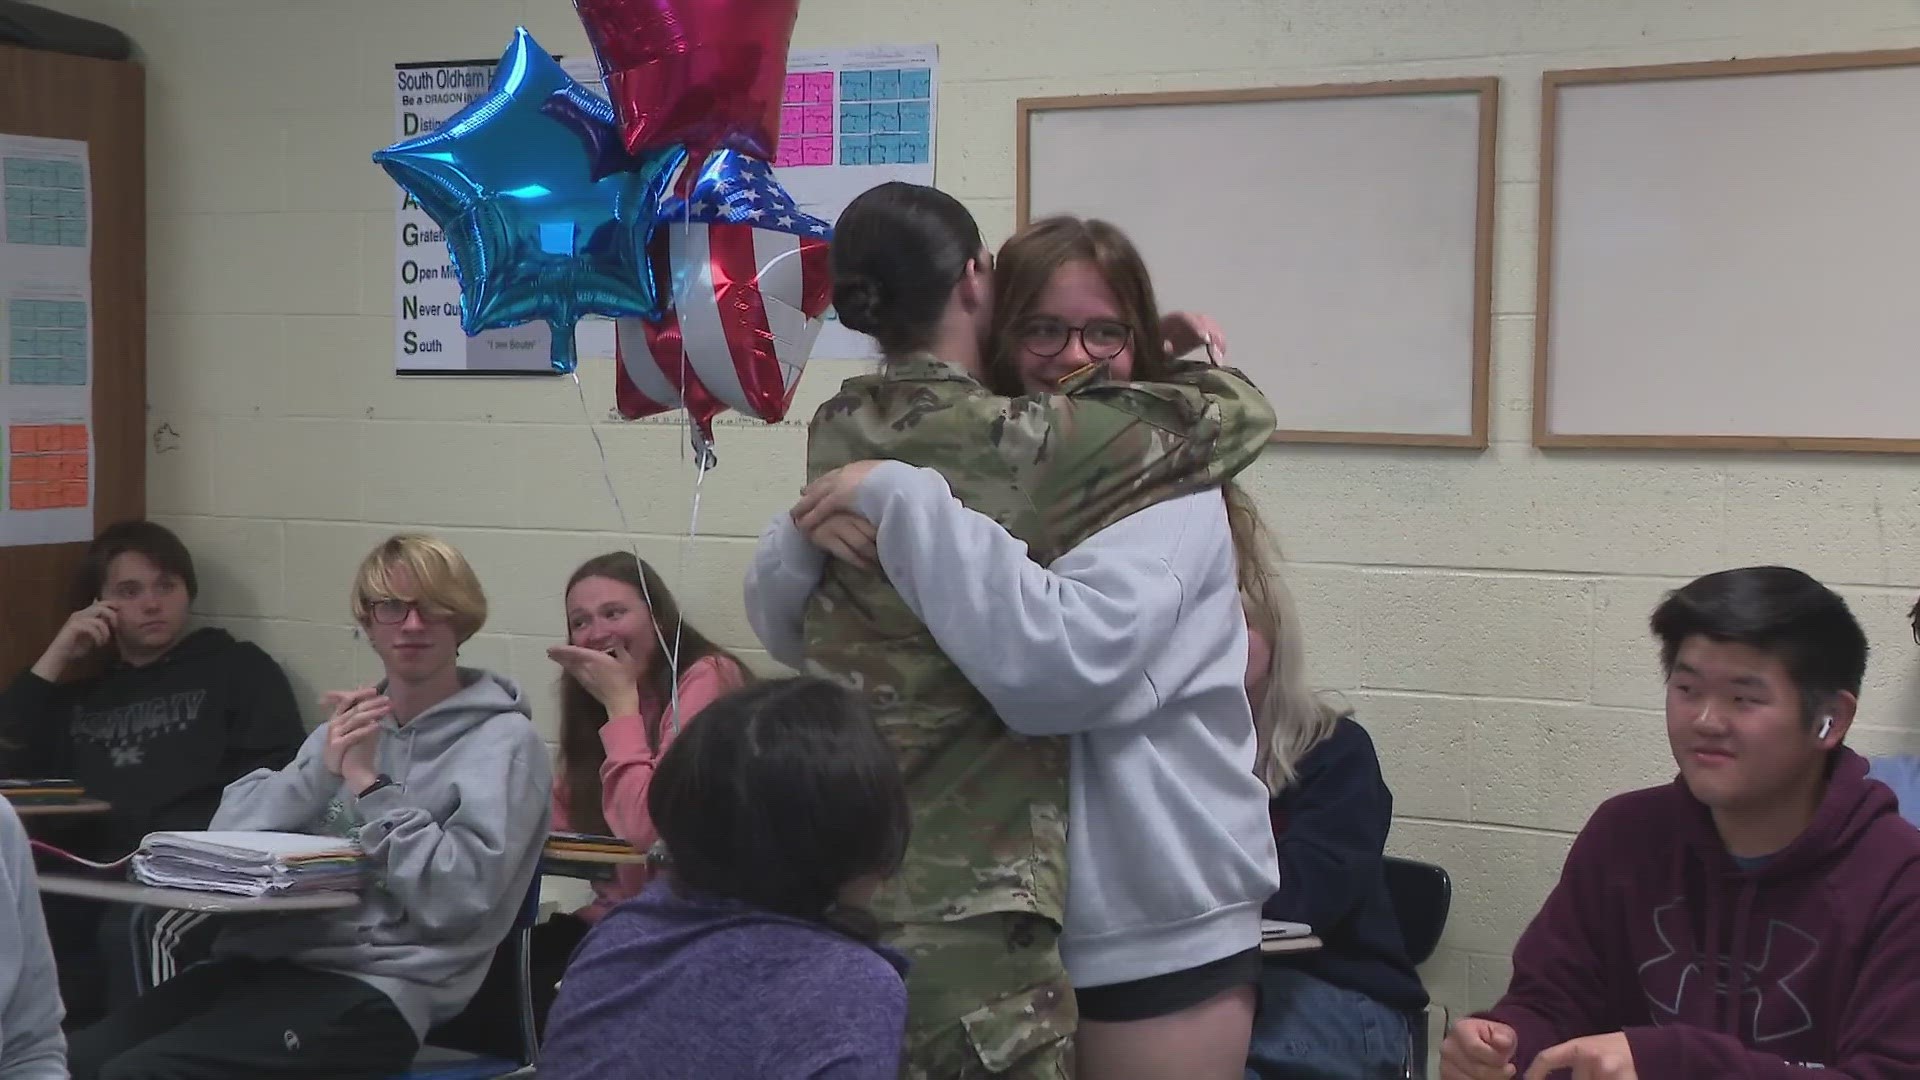 U.S. Army Specialist Hannah Henning hasn't seen her sister in nine months, so she decided to surprise her while she was at school.